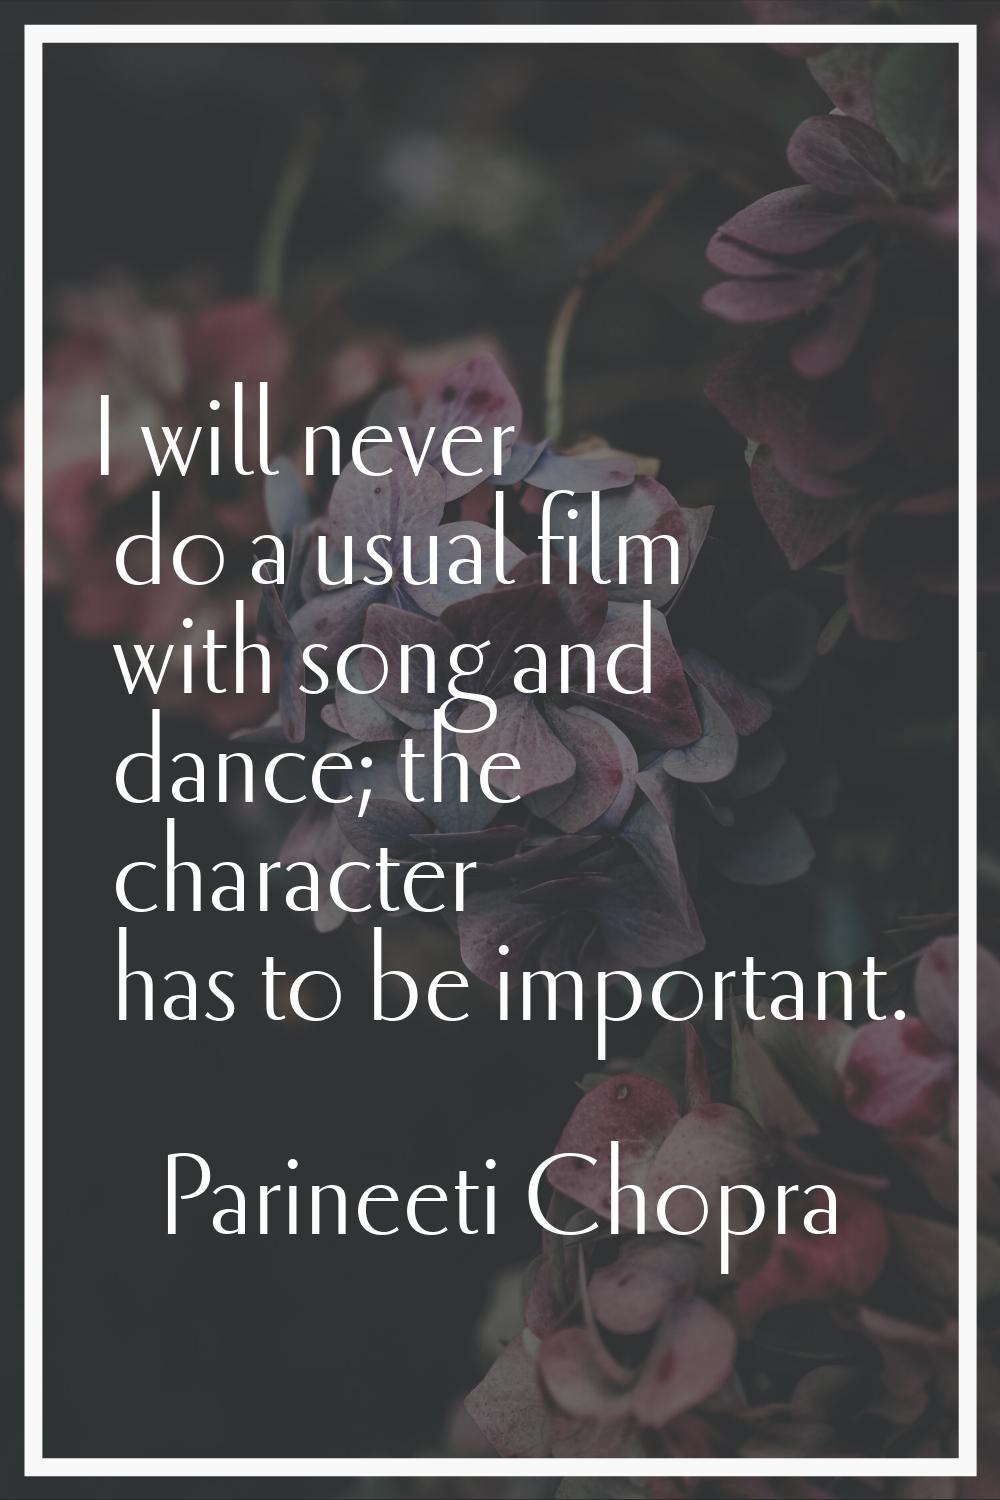 I will never do a usual film with song and dance; the character has to be important.